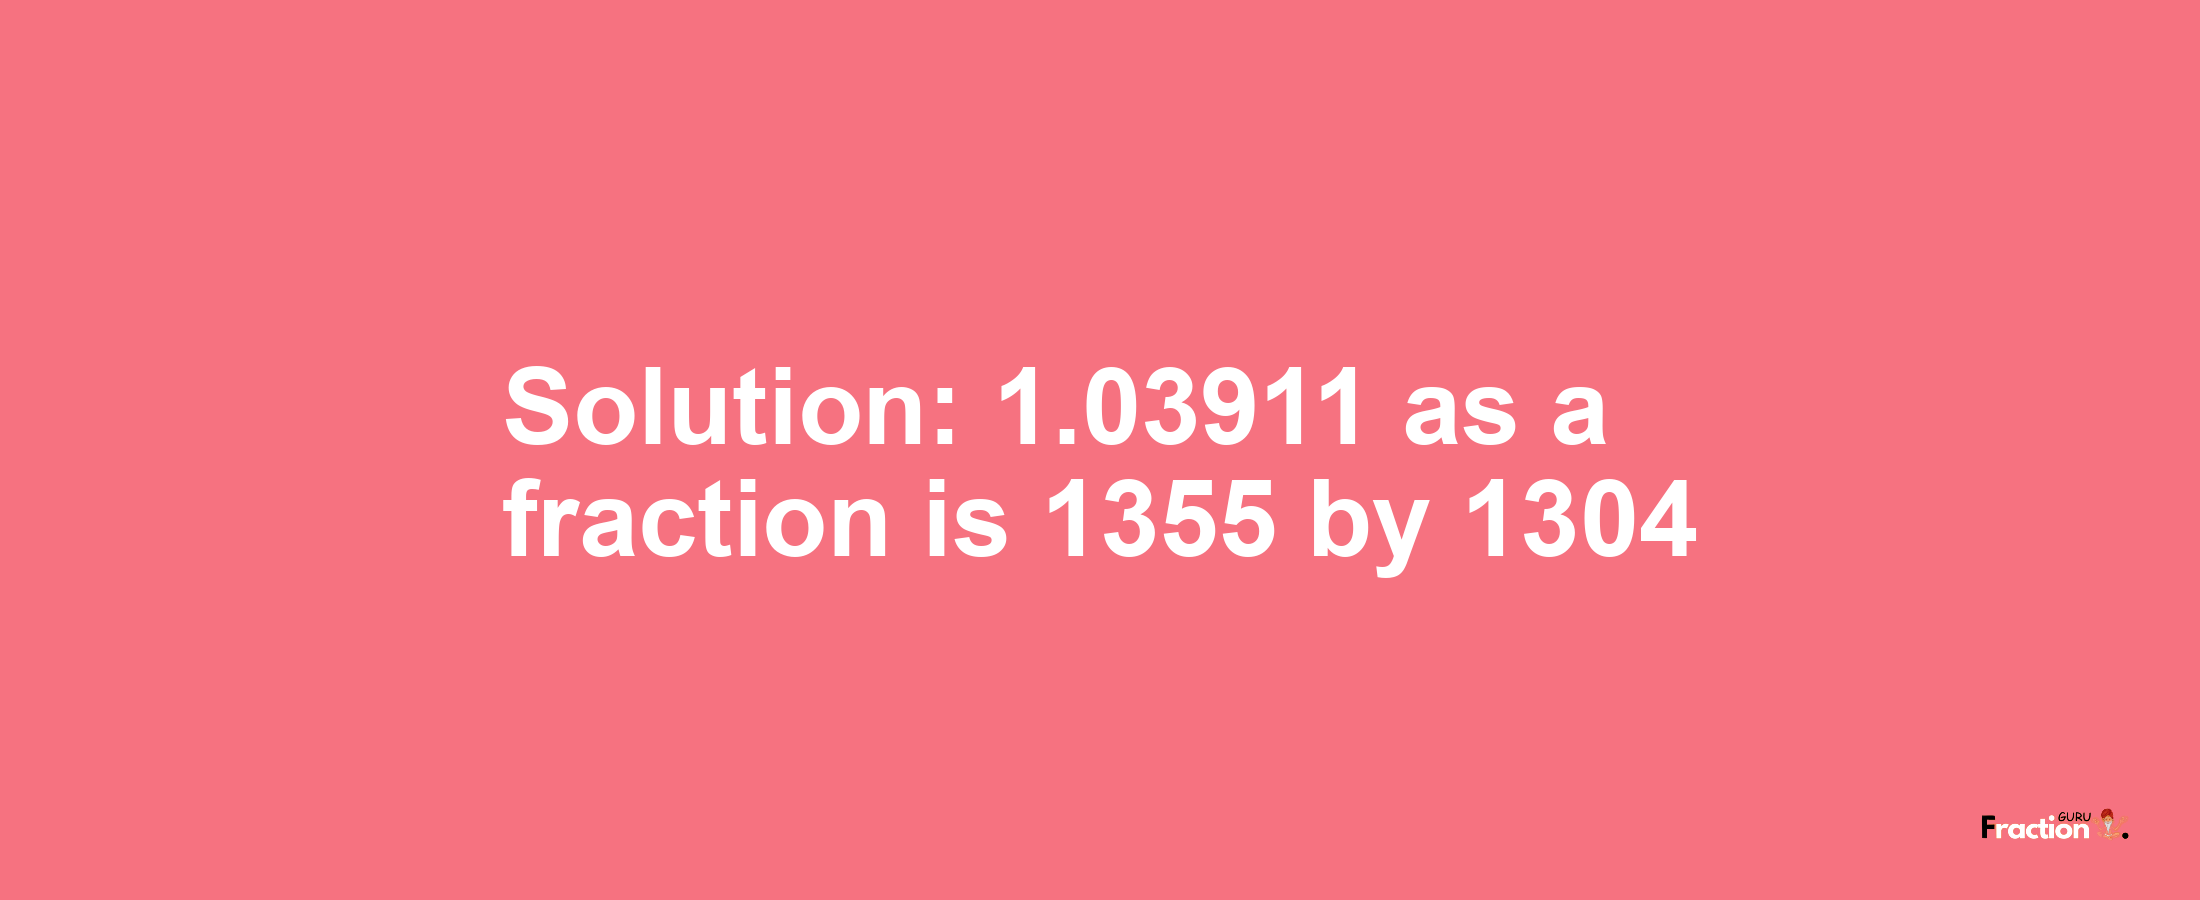 Solution:1.03911 as a fraction is 1355/1304